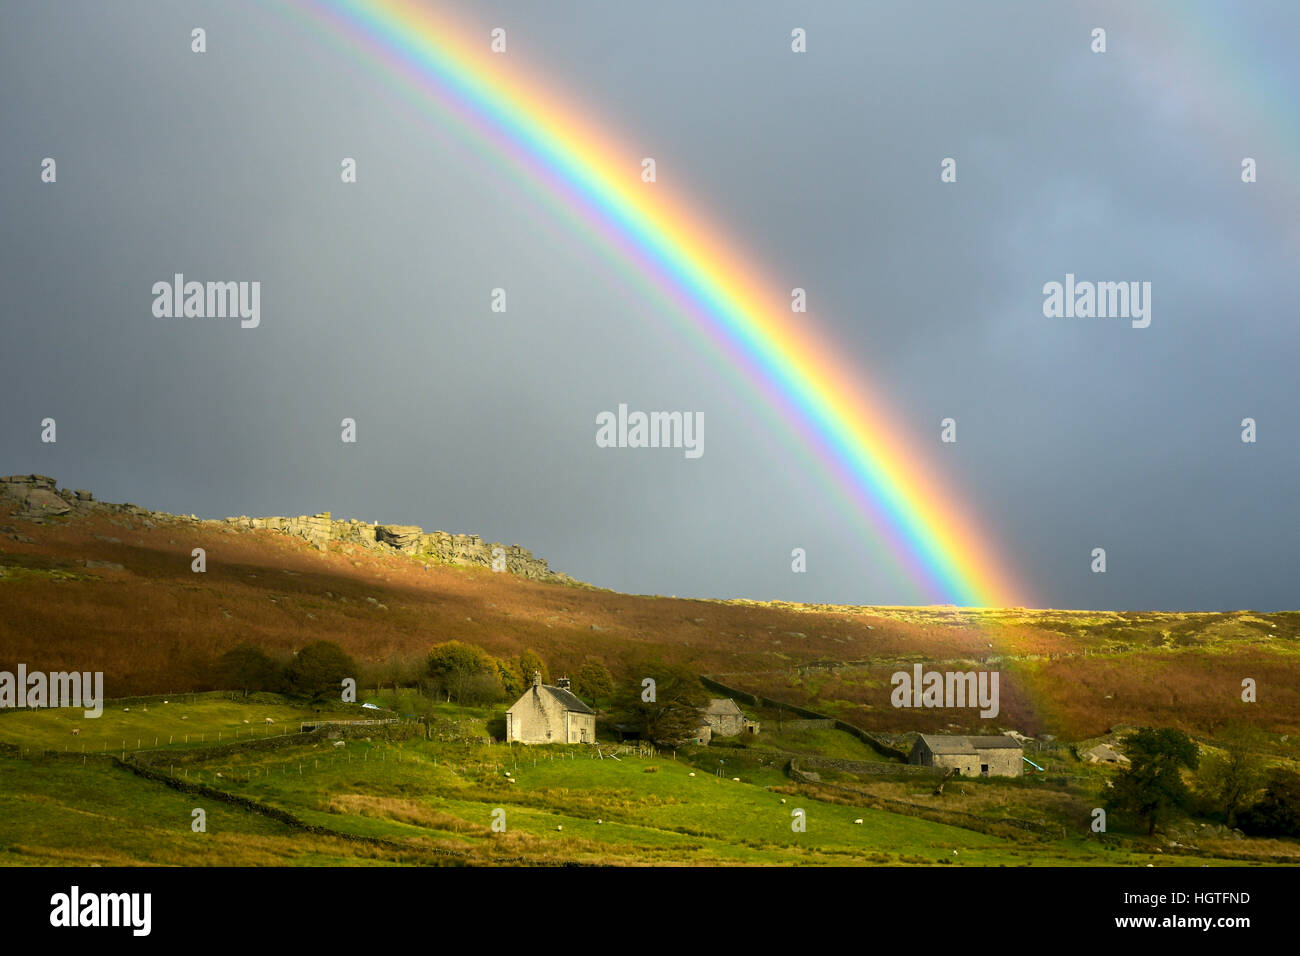 Rainbow appears during storm in the Peak District Derbyshire countryside Stock Photo